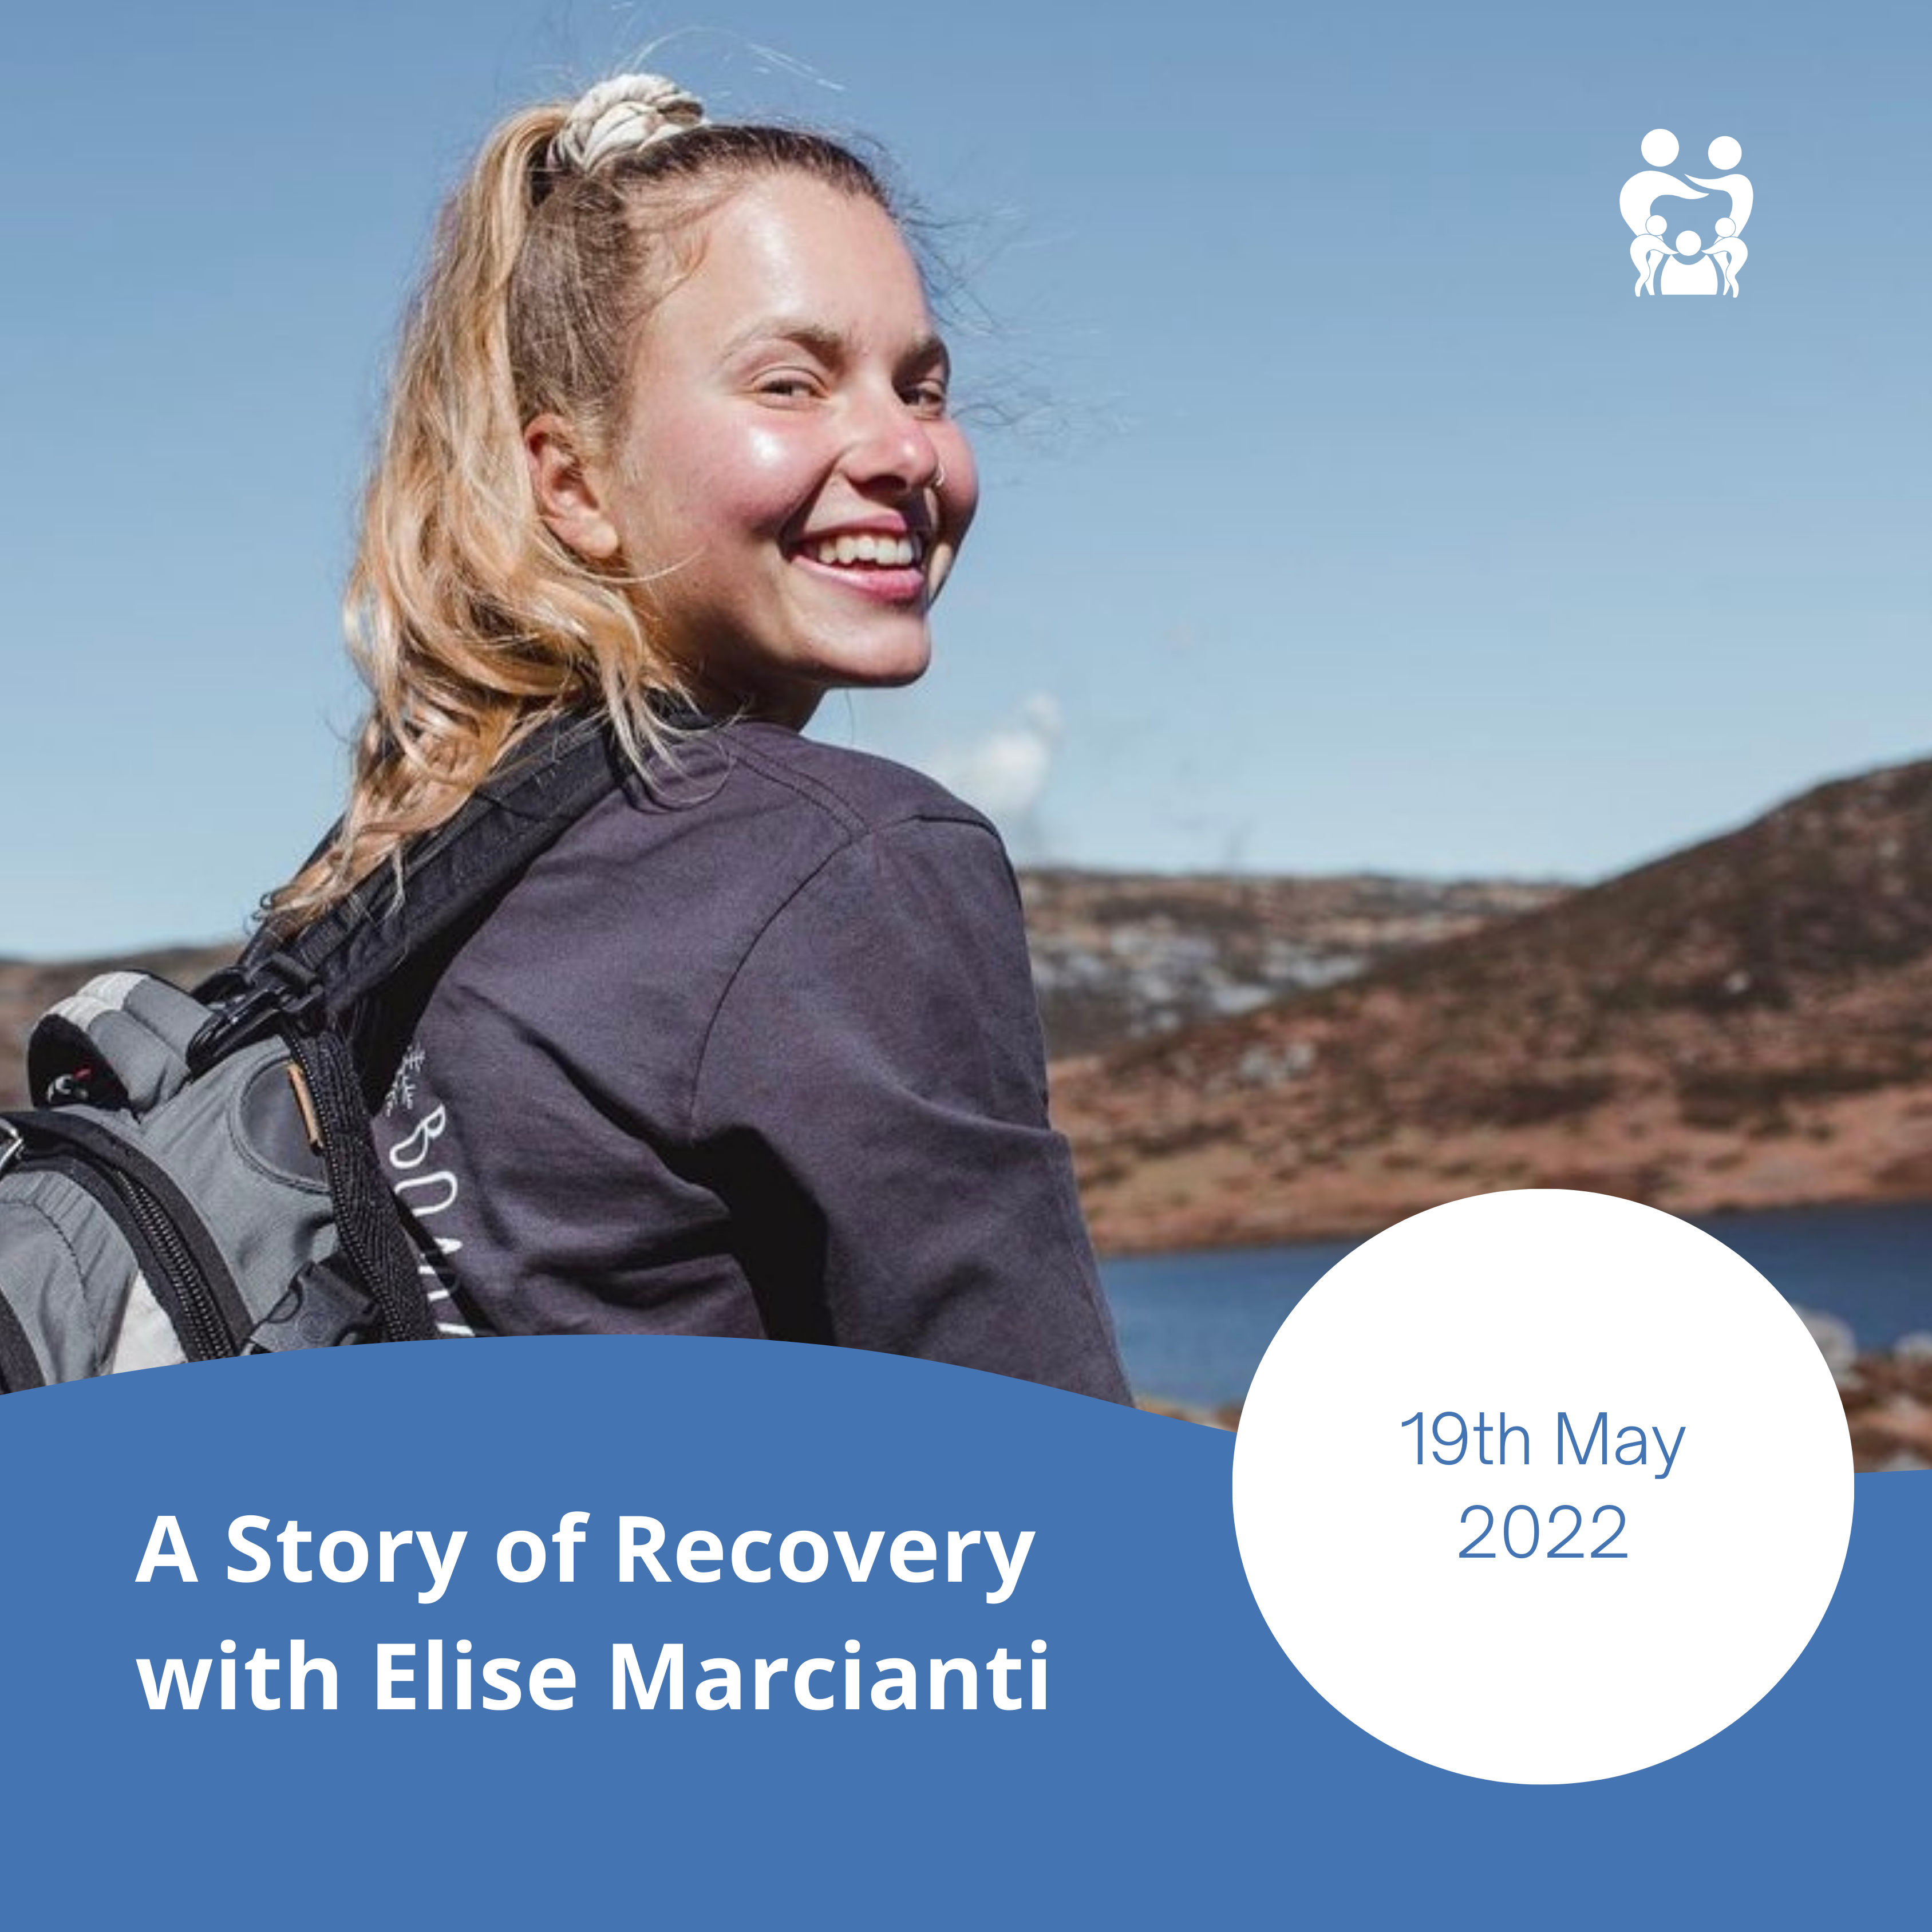 Story of Hope & Recovery with Elise Marcianti 19 May 2022